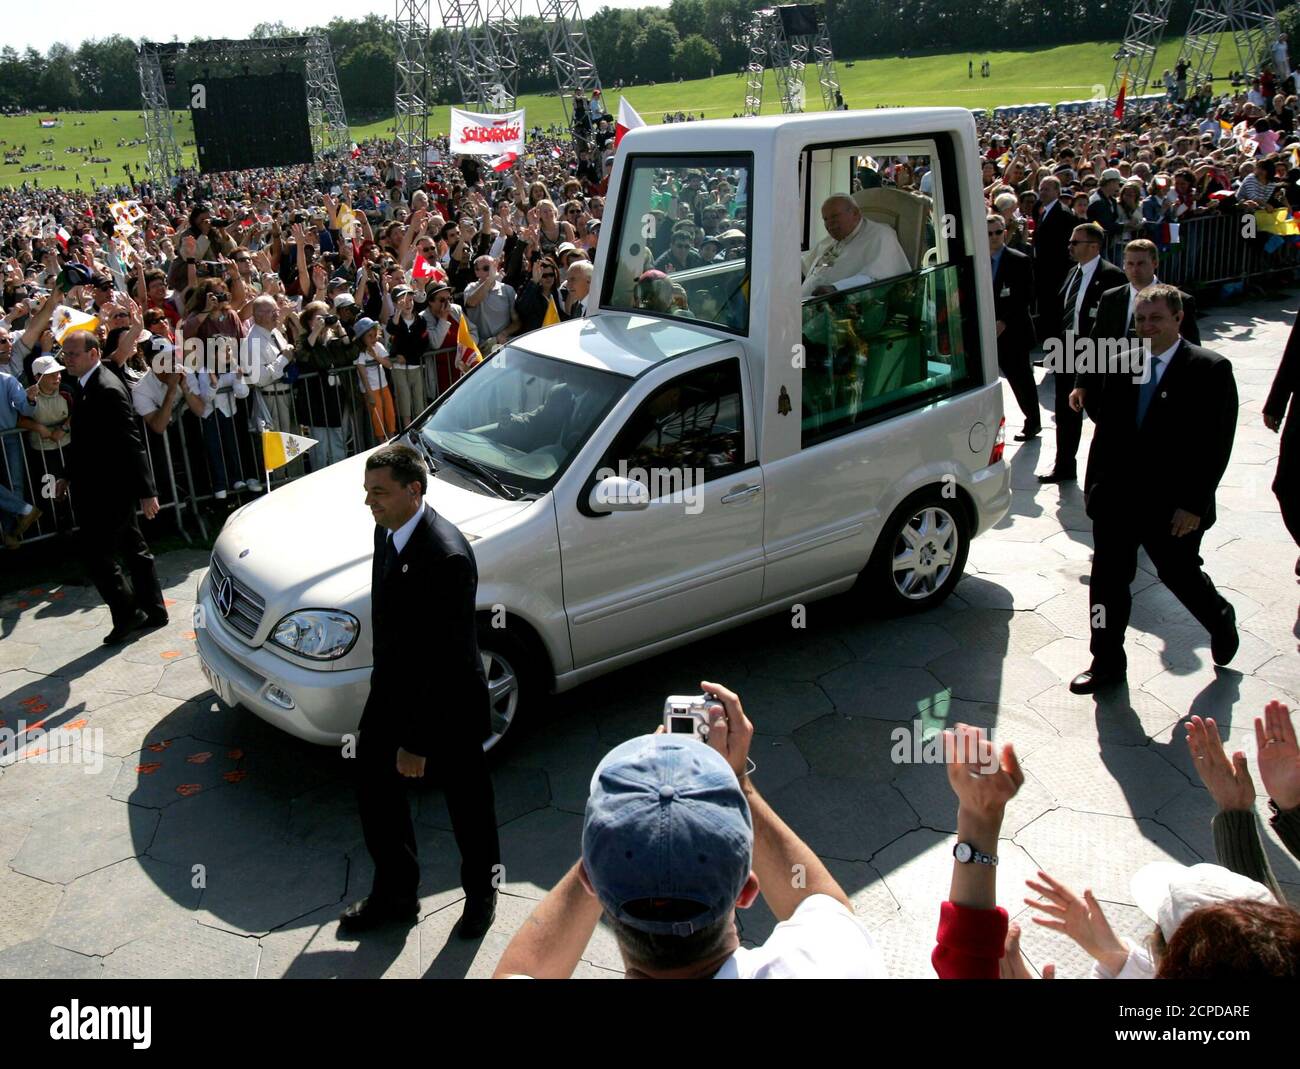 Pope John Paul II arrives on his popemobile to celebrate an open-air mass  in the Allmen Park in Berne June 6, 2004. The ailing 84-year-old pontiff  read mass in a relatively clear